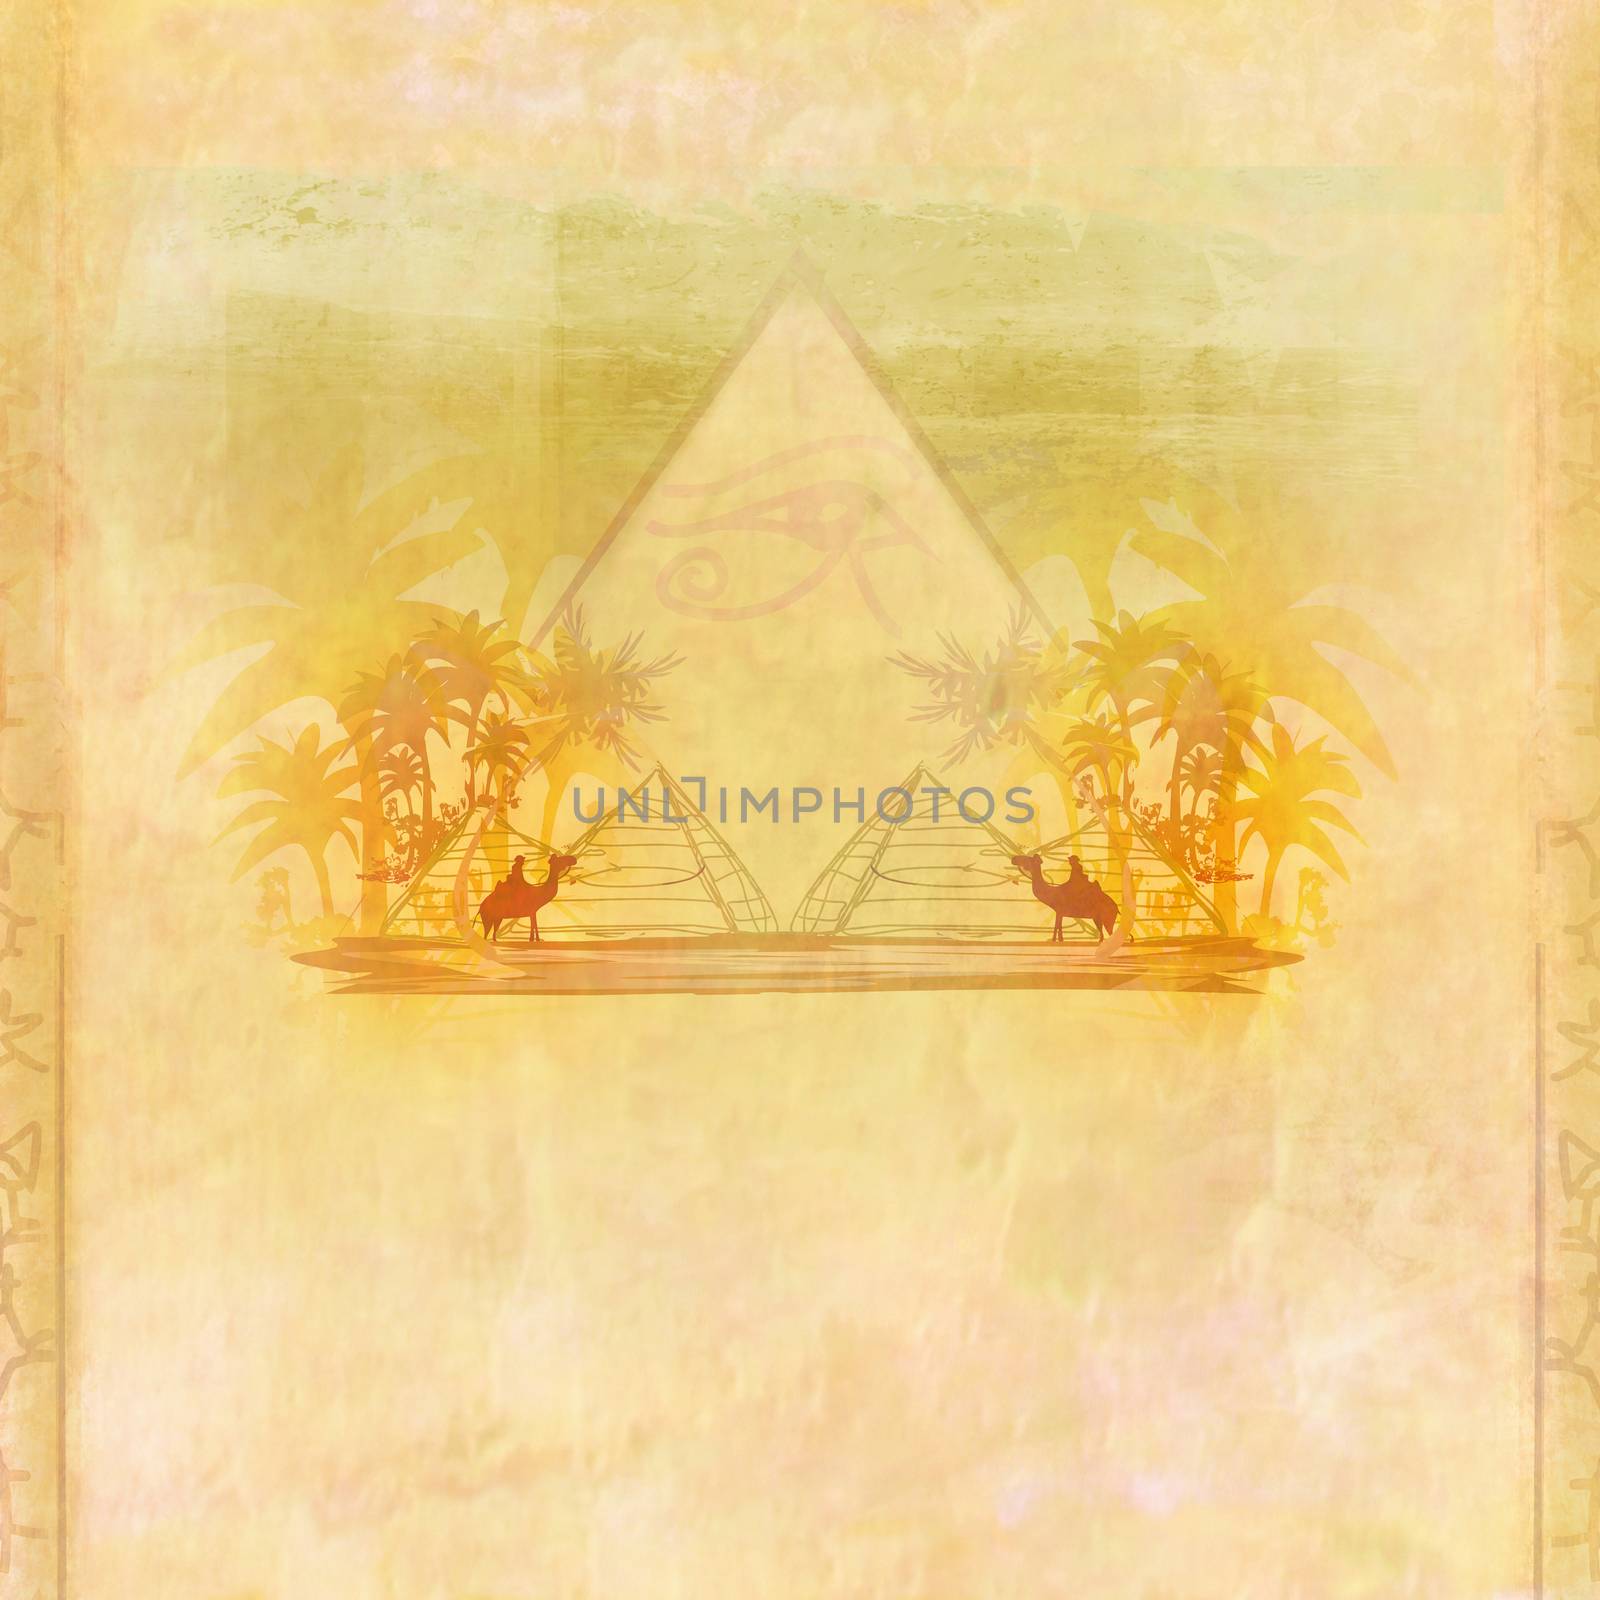 Vintage background with pyramids giza by JackyBrown